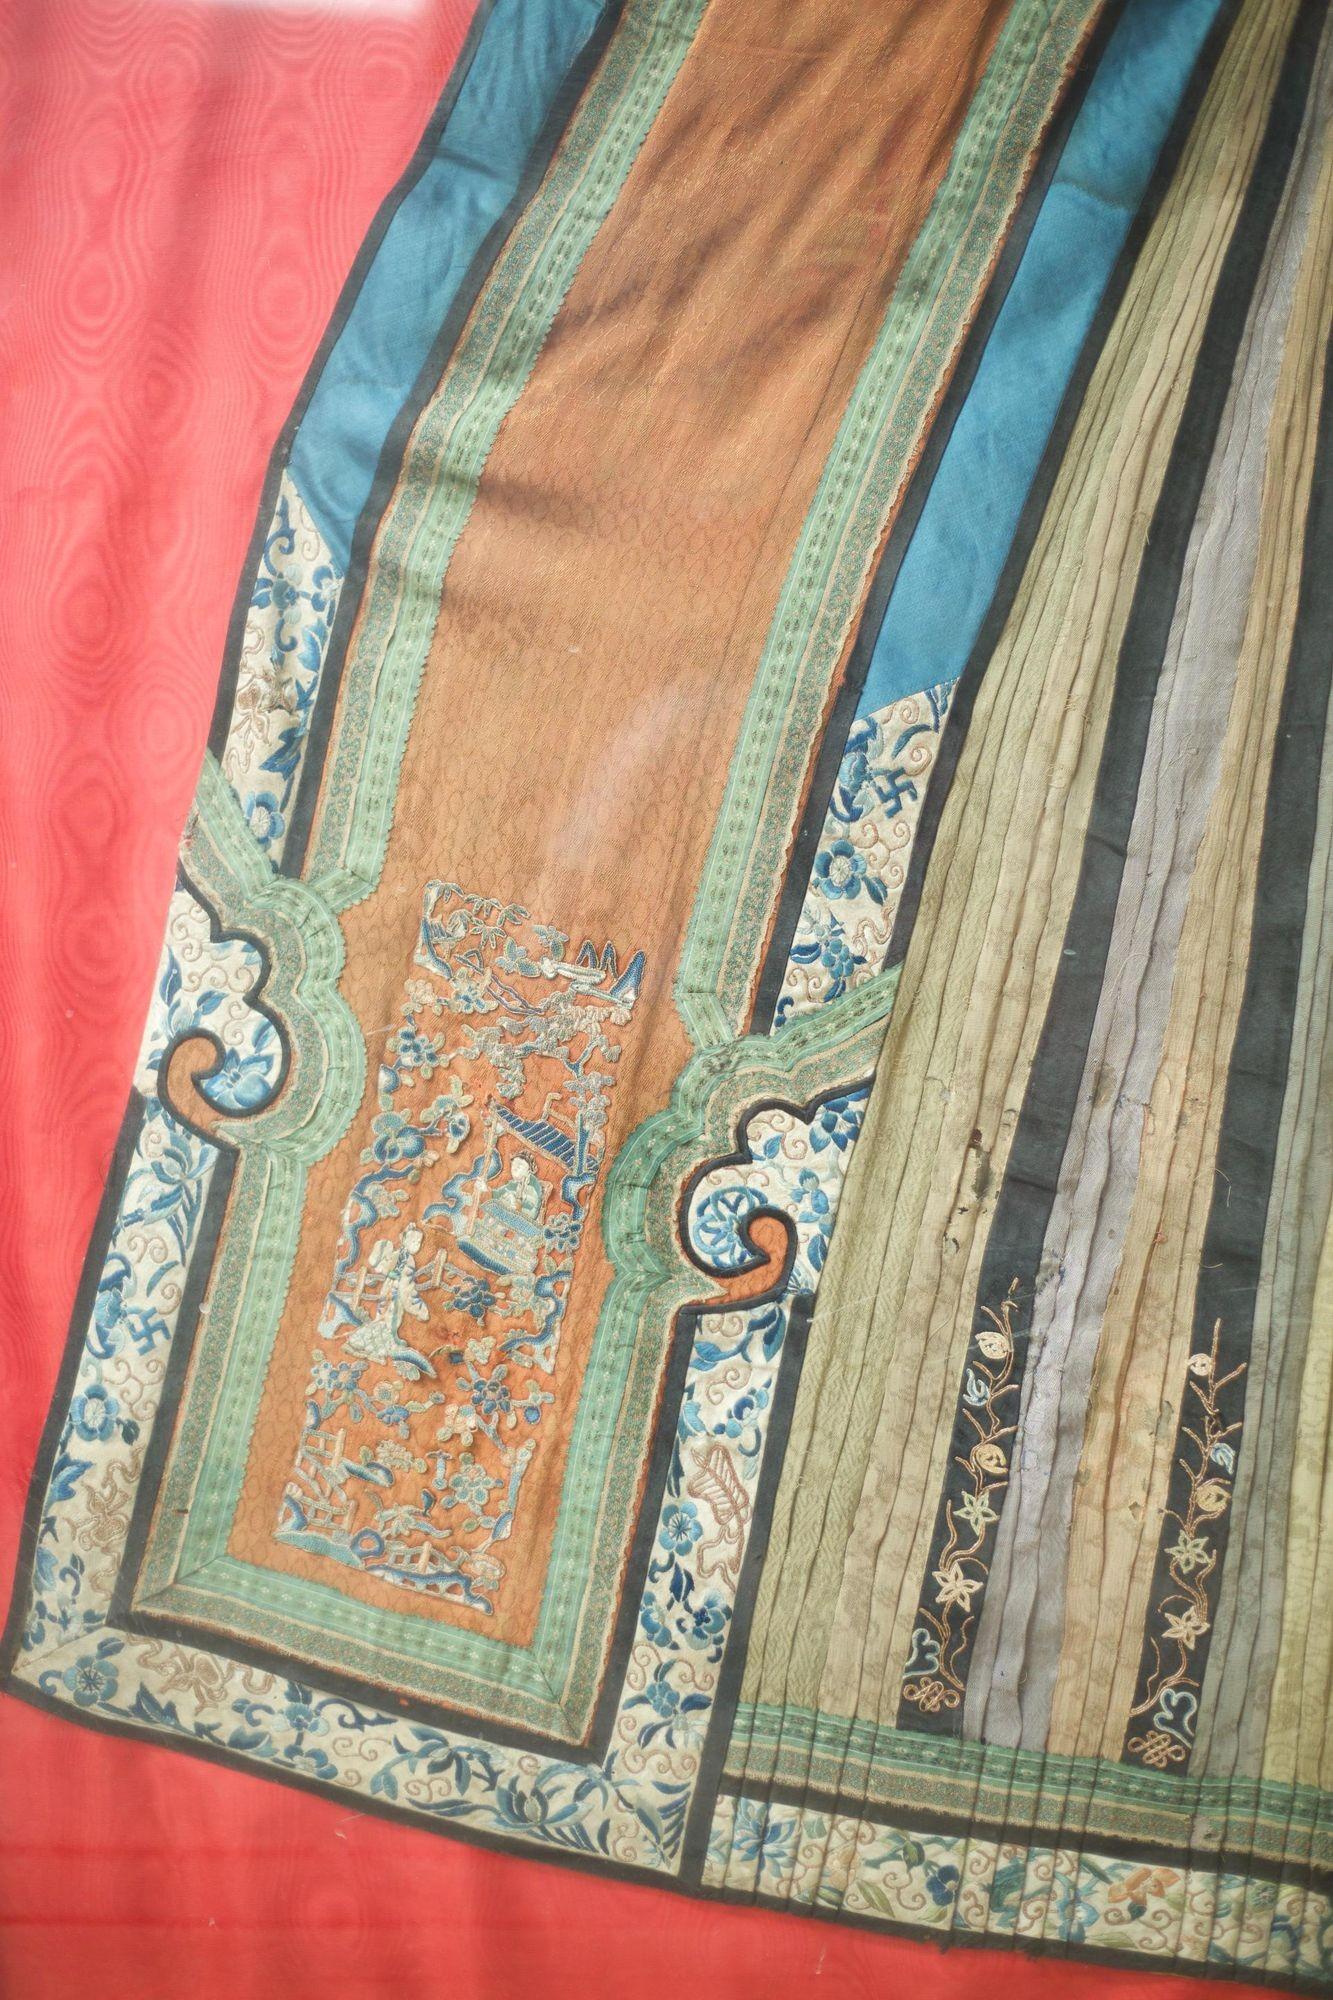 These are a stunning and rare pair of framed 18th century Chinese silk ceremonial dresses. The amount of detail is incredible with very fine figures and birds amongst tress. The condition of these is very good with clean bold colours and near